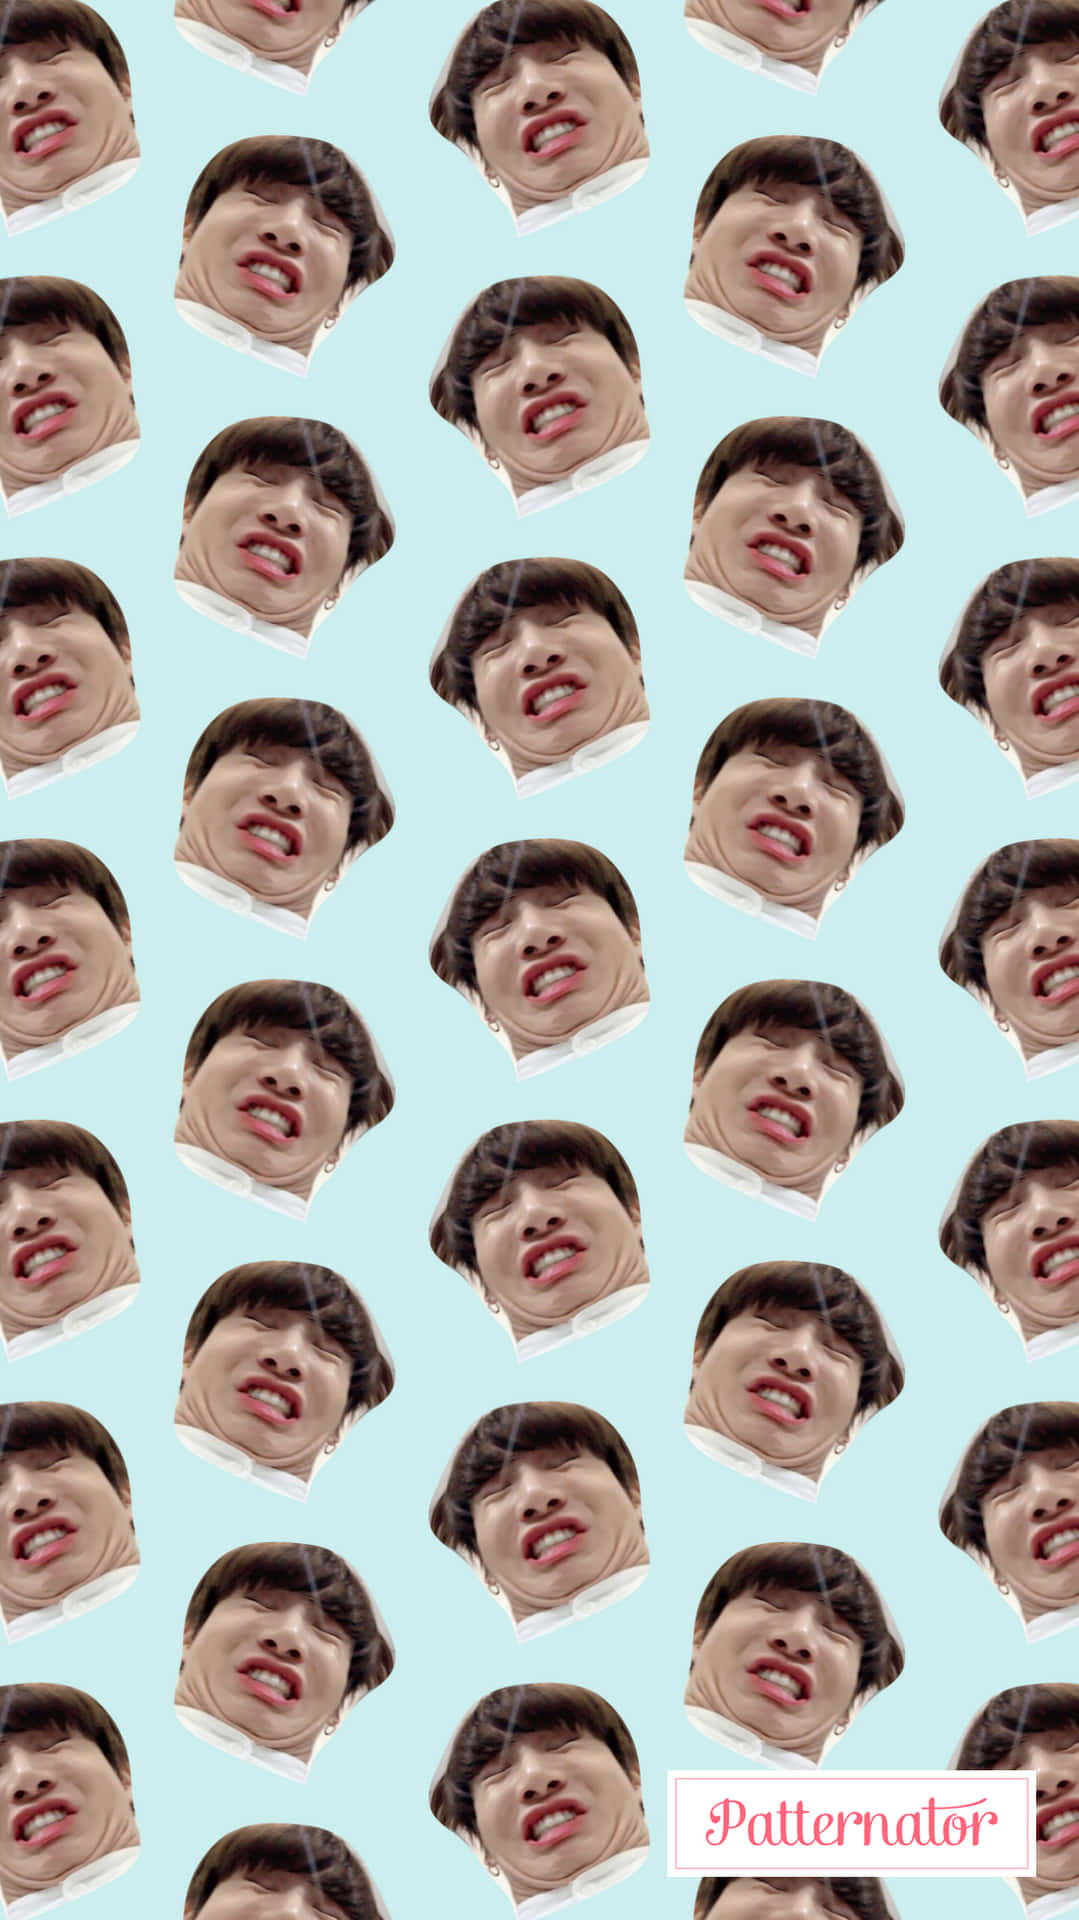 A Pattern With Many Faces Of People Wallpaper